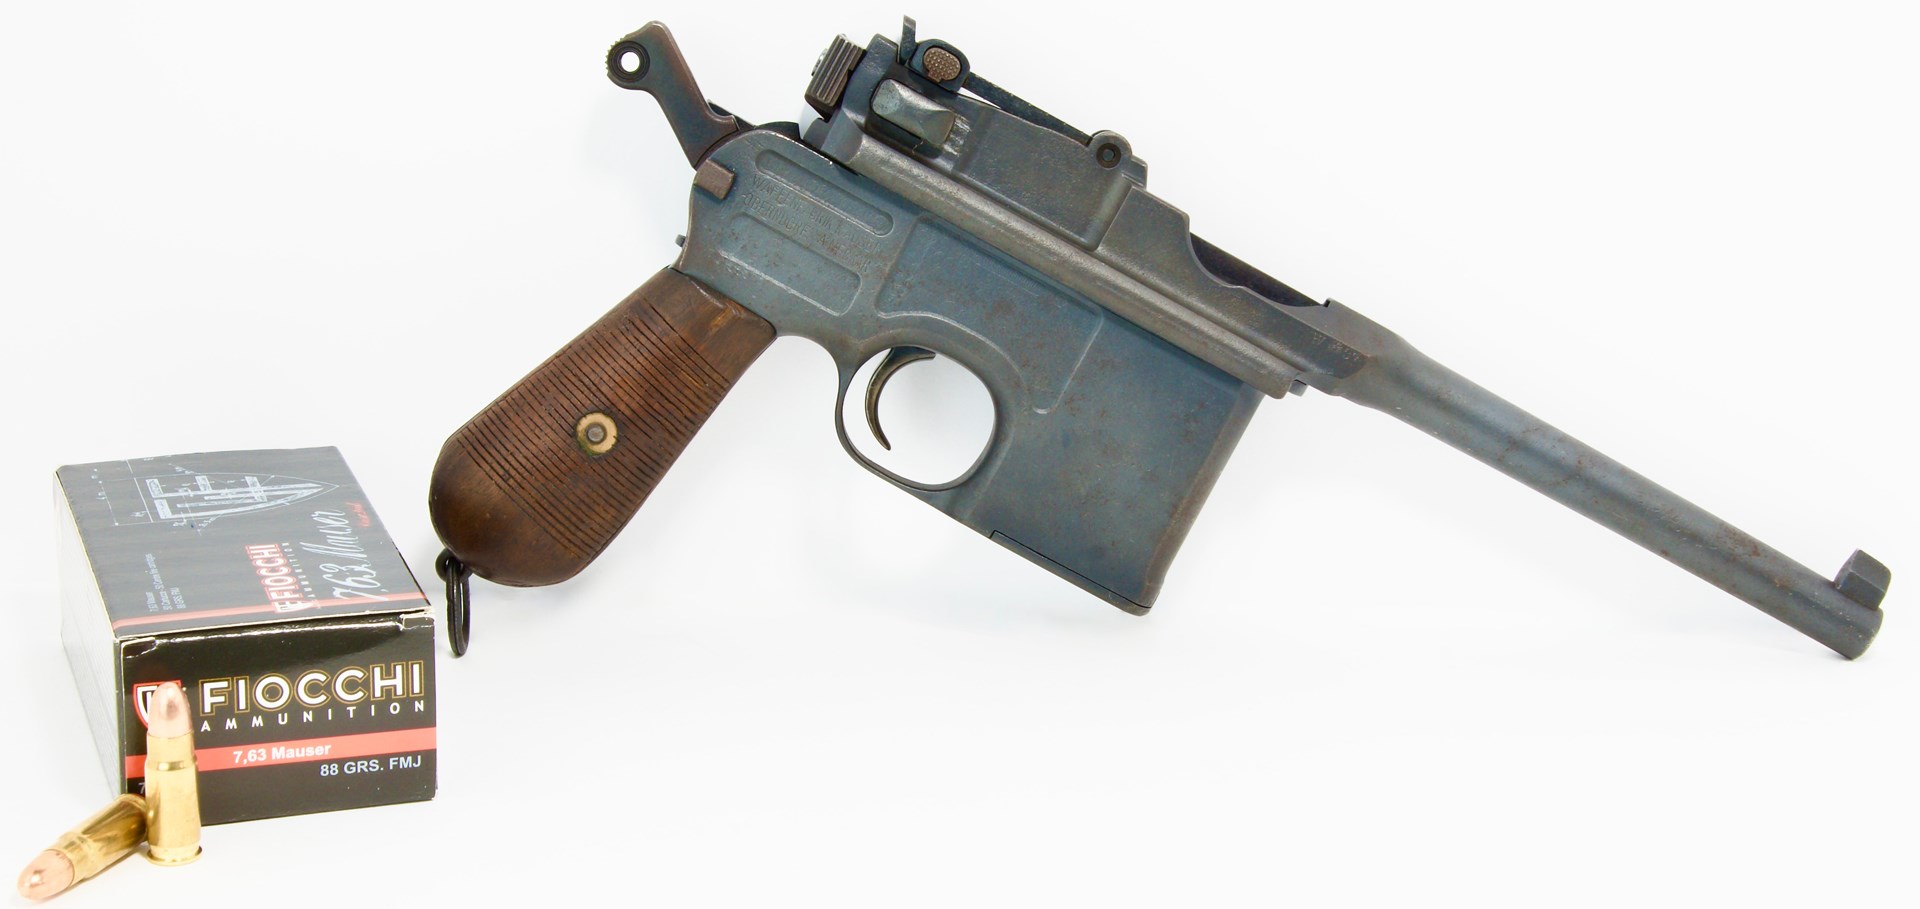 right-side view of Mauser C96 pistol semi-automatic white background fiocchi ammunition box foreground